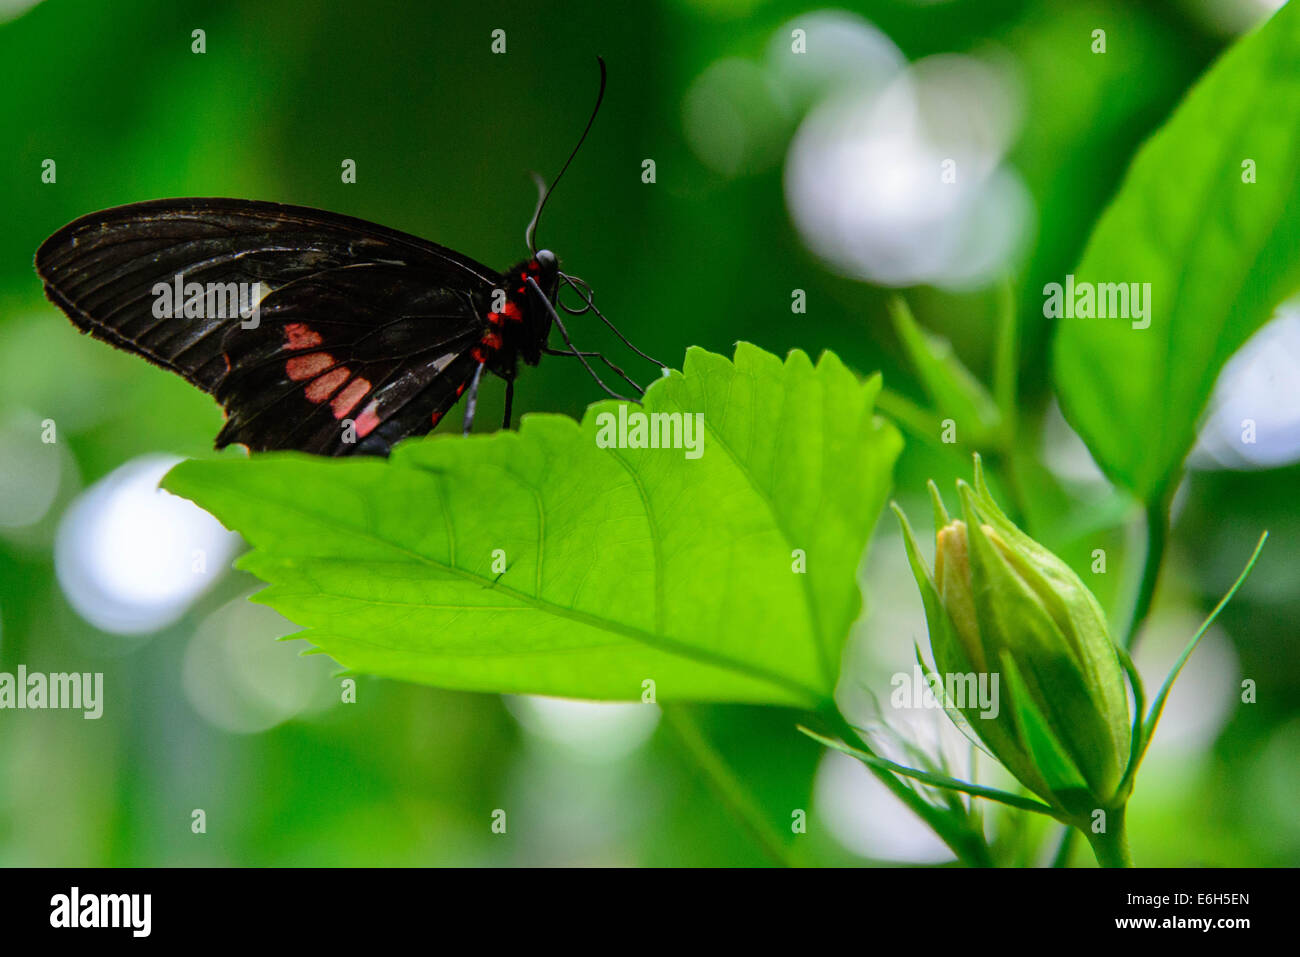 a red and black Common Postman butterfly in nature Stock Photo